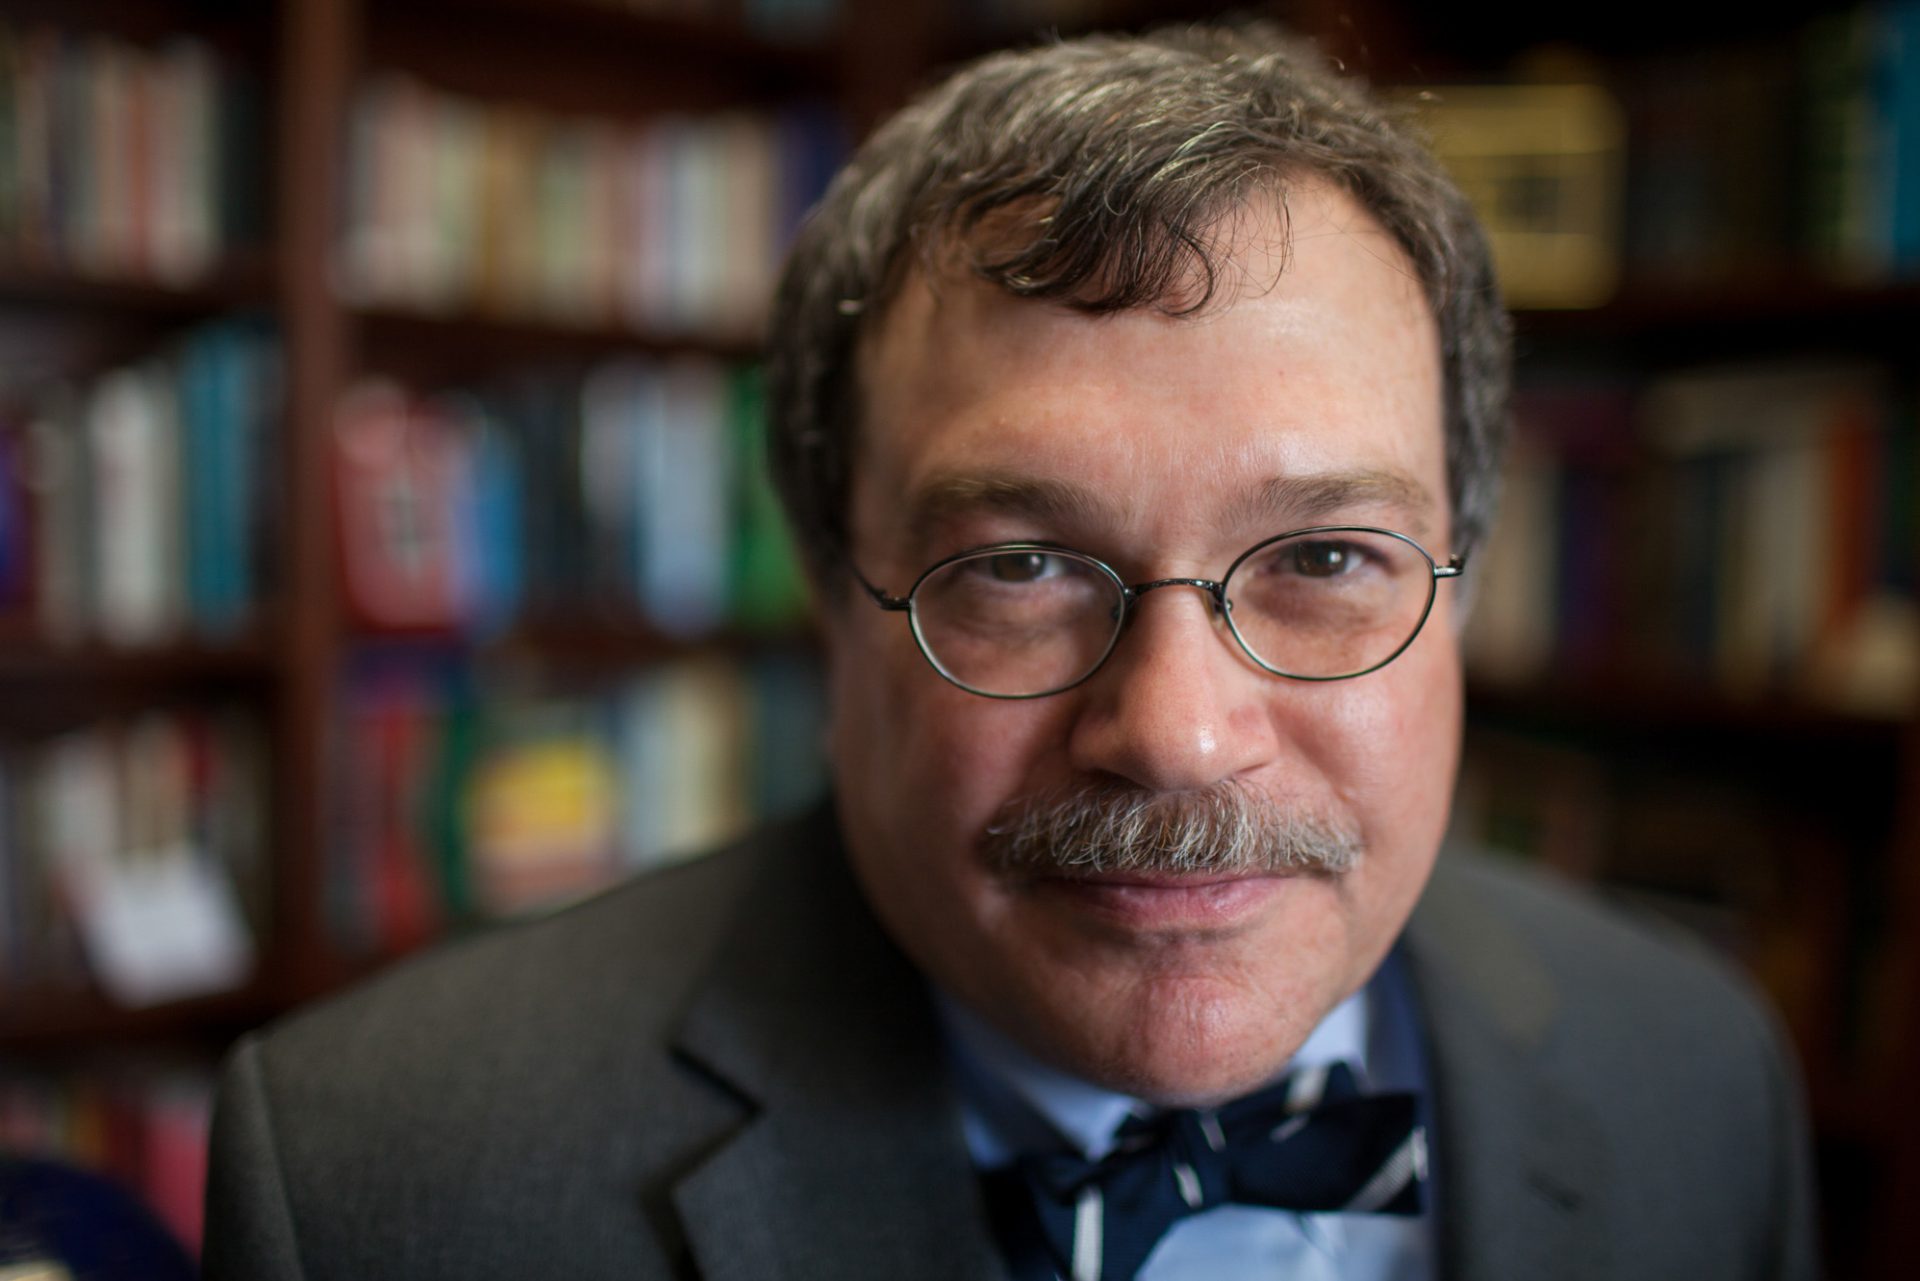 Dr. Peter Hotez is co-director of the Center for Vaccine Development at Texas Children's Hospital. Some people in the global health sector call him "Bono with a bow tie."